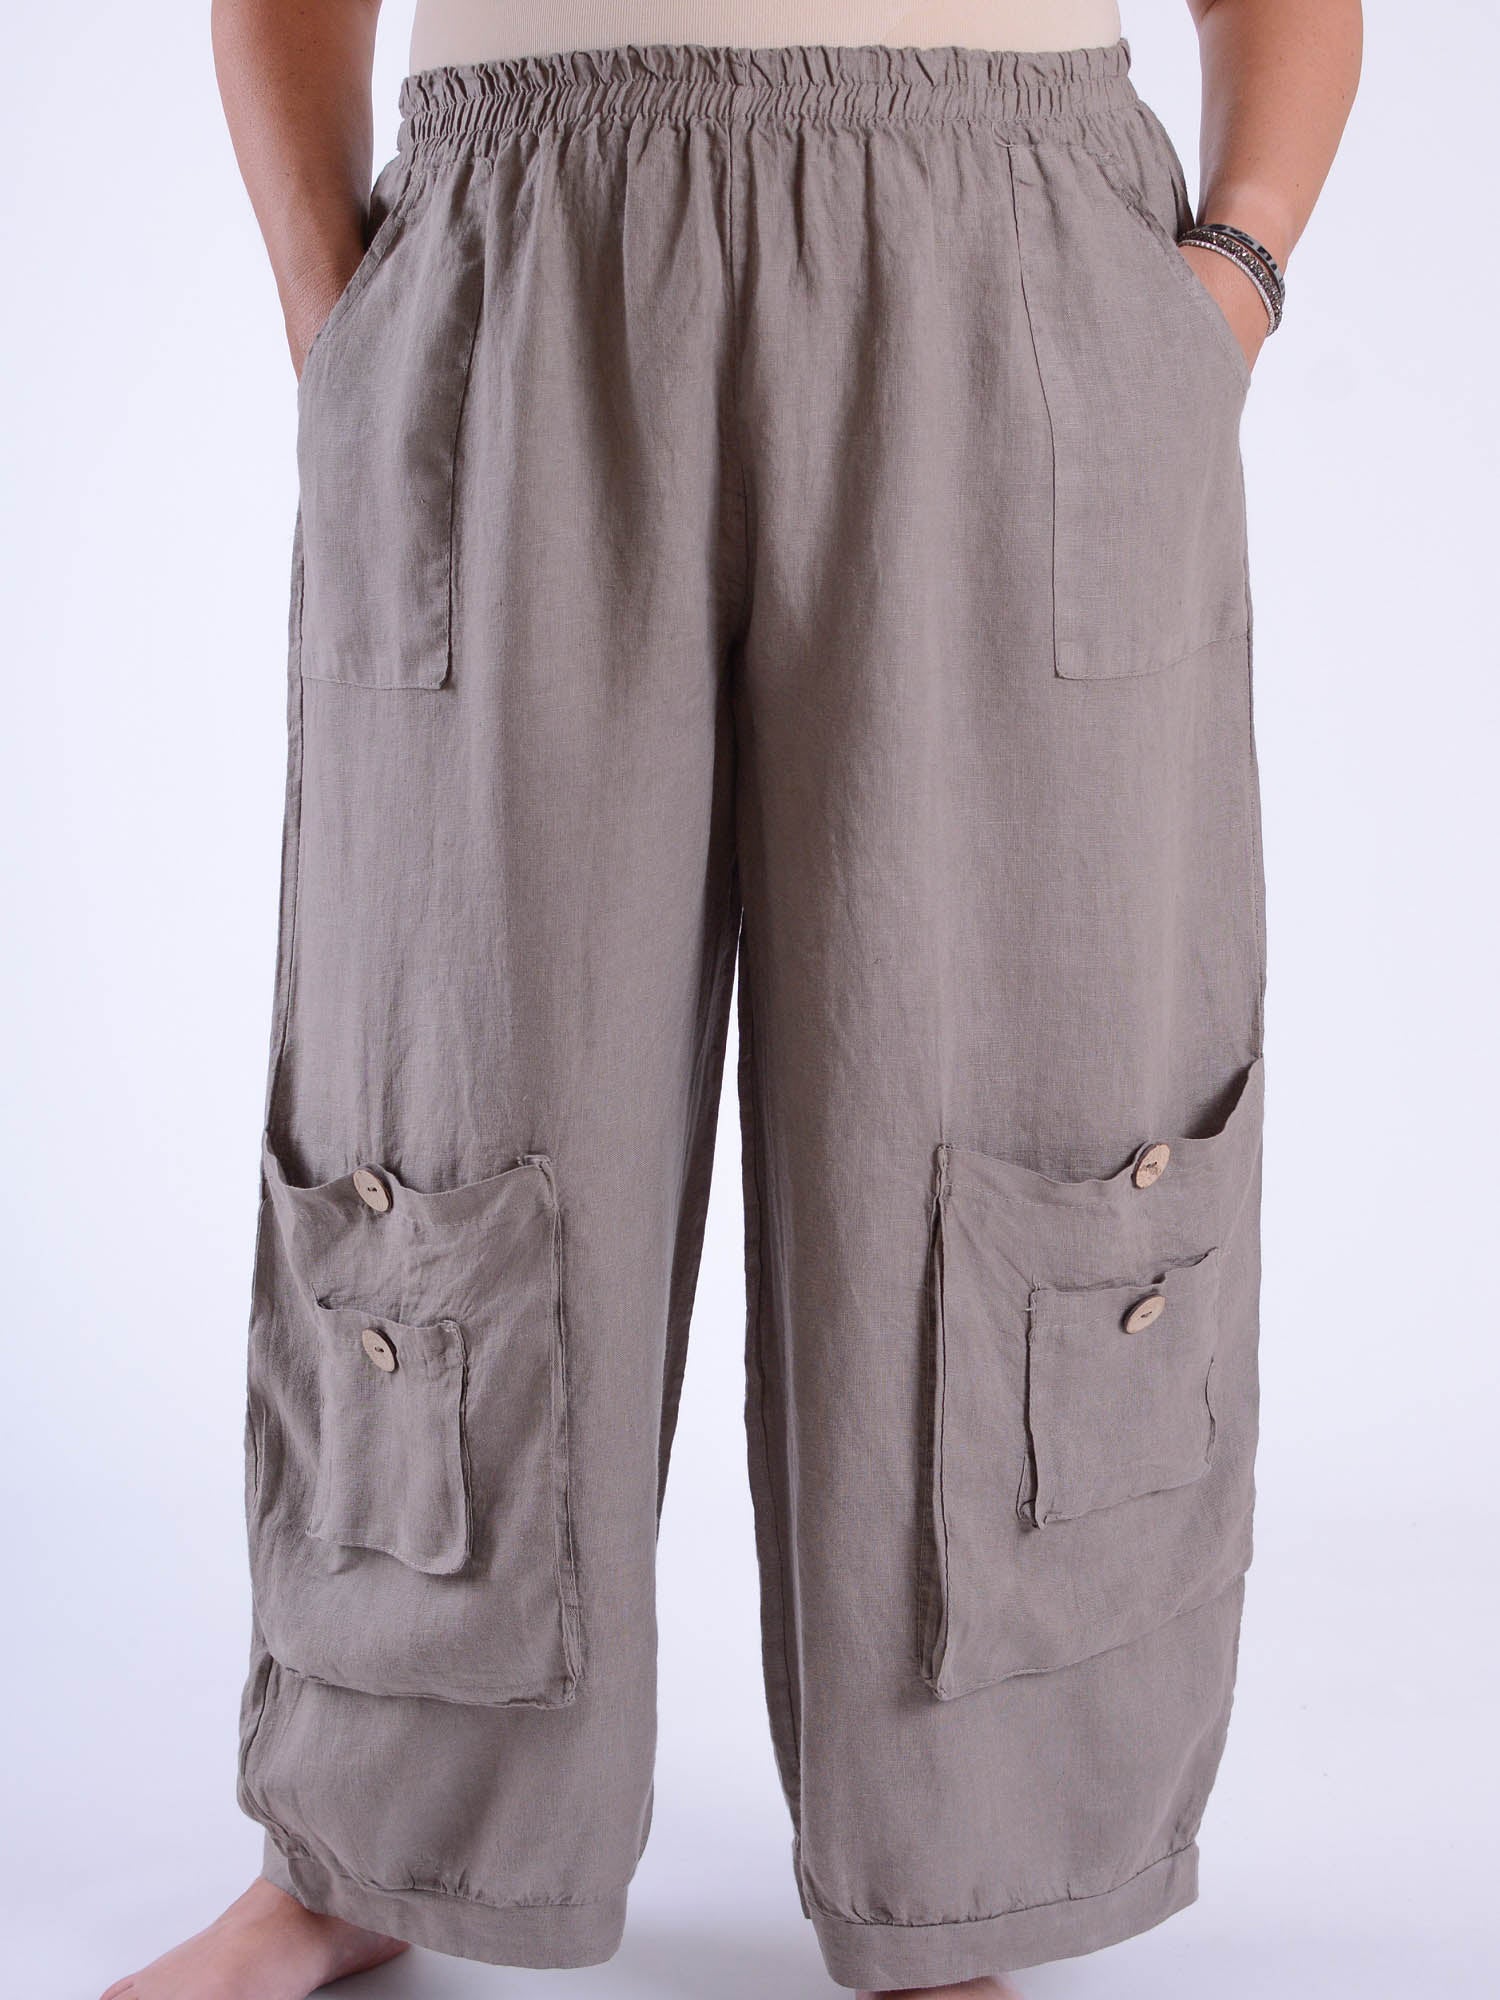 Linen Trousers with button pockets - 10034, Trousers, Pure Plus Clothing, Lagenlook Clothing, Plus Size Fashion, Over 50 Fashion